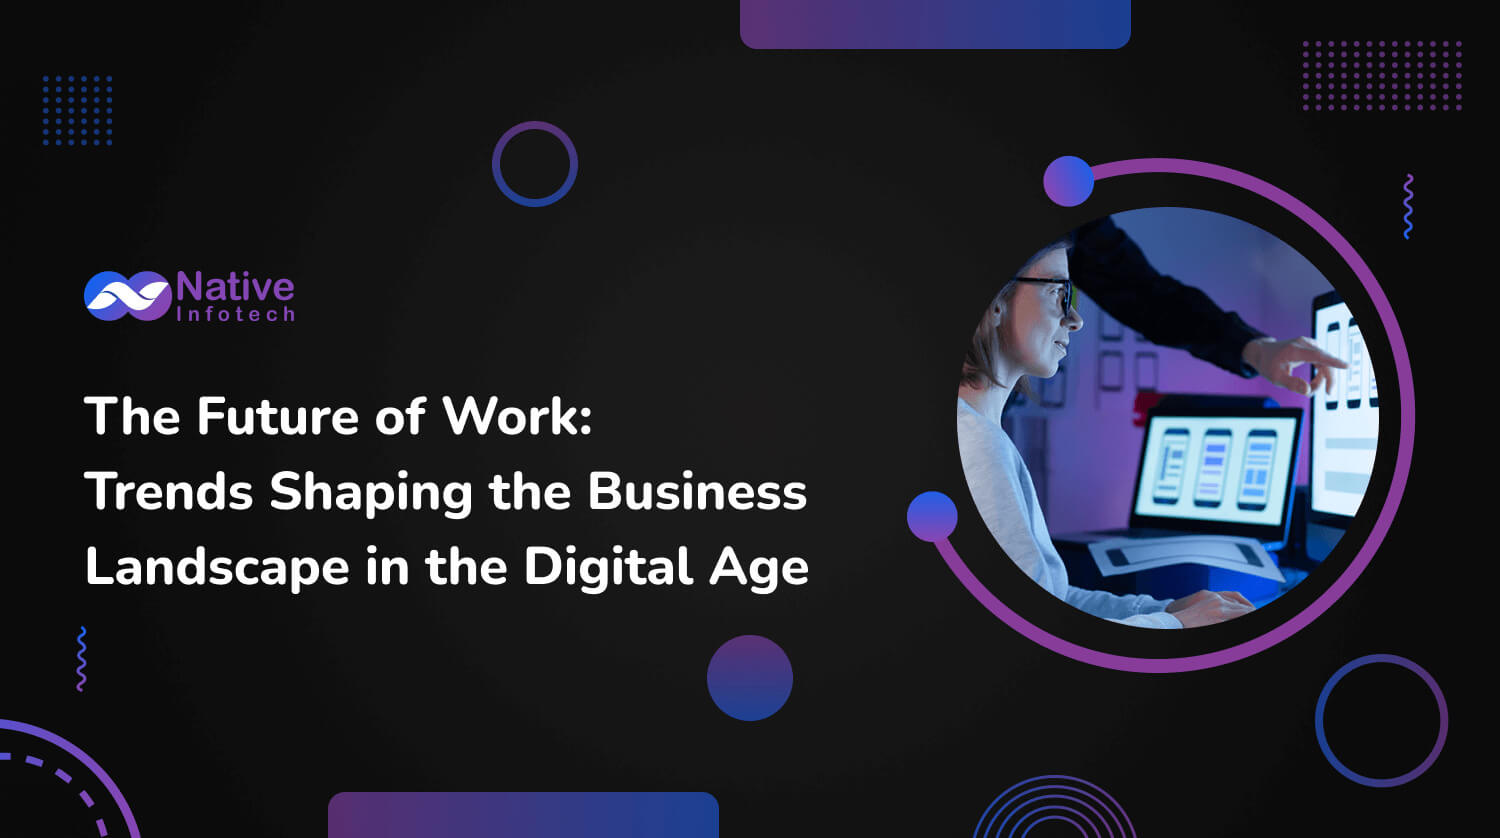 The Future of Work: Trends Shaping the Business Landscape in the Digital Age | Native Infotech